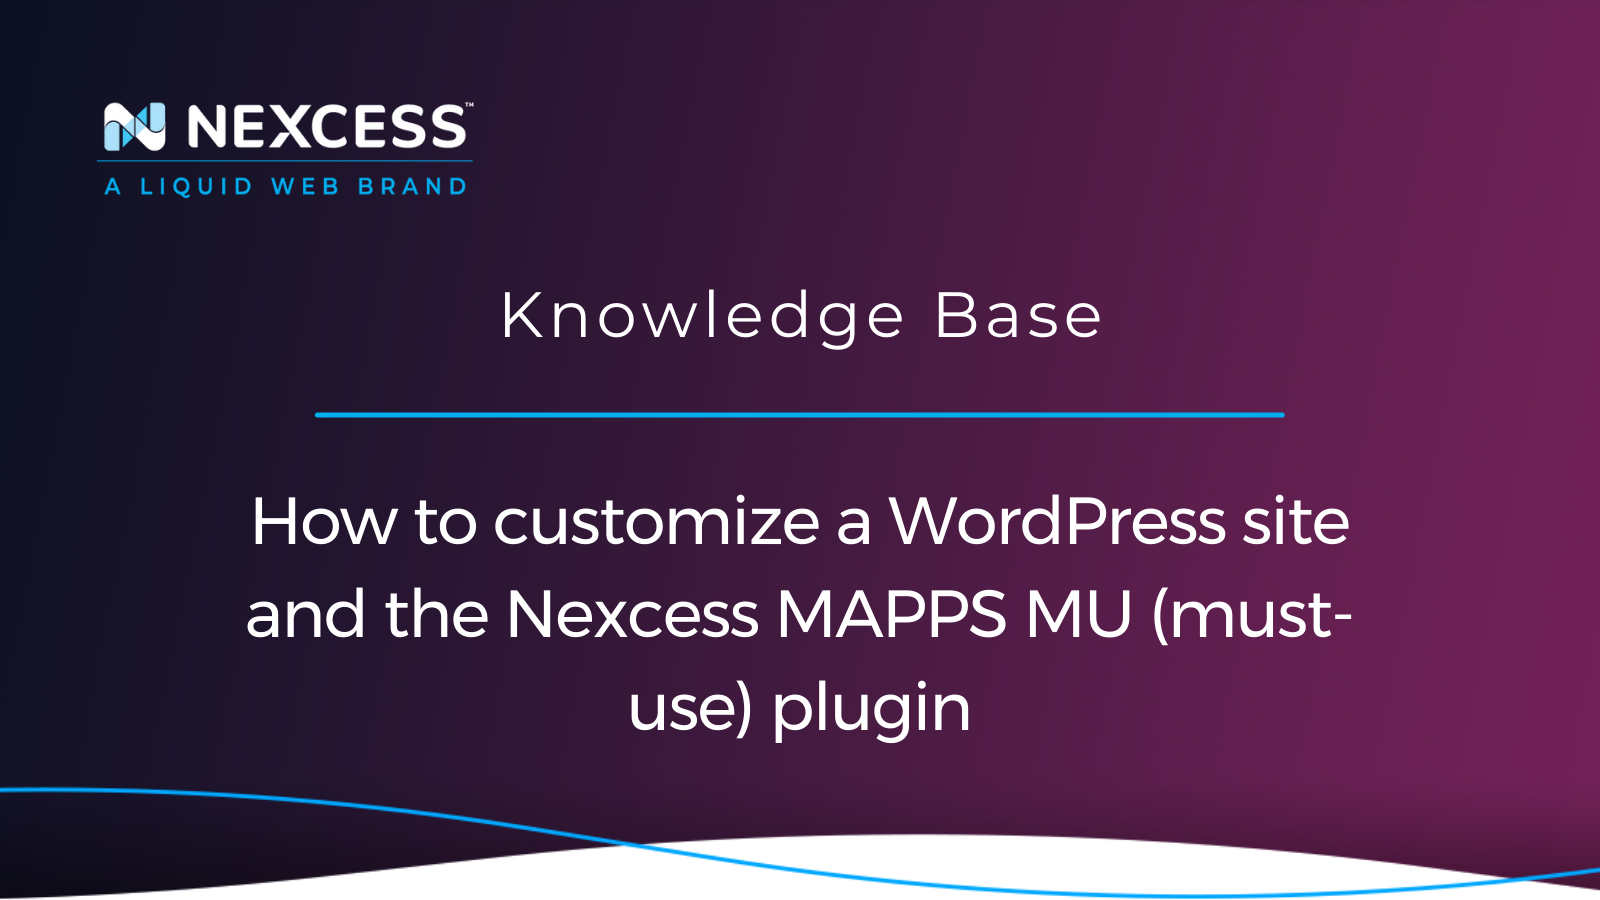 How to customize a WordPress site and the Nexcess MAPPS MU (must-use) plugin